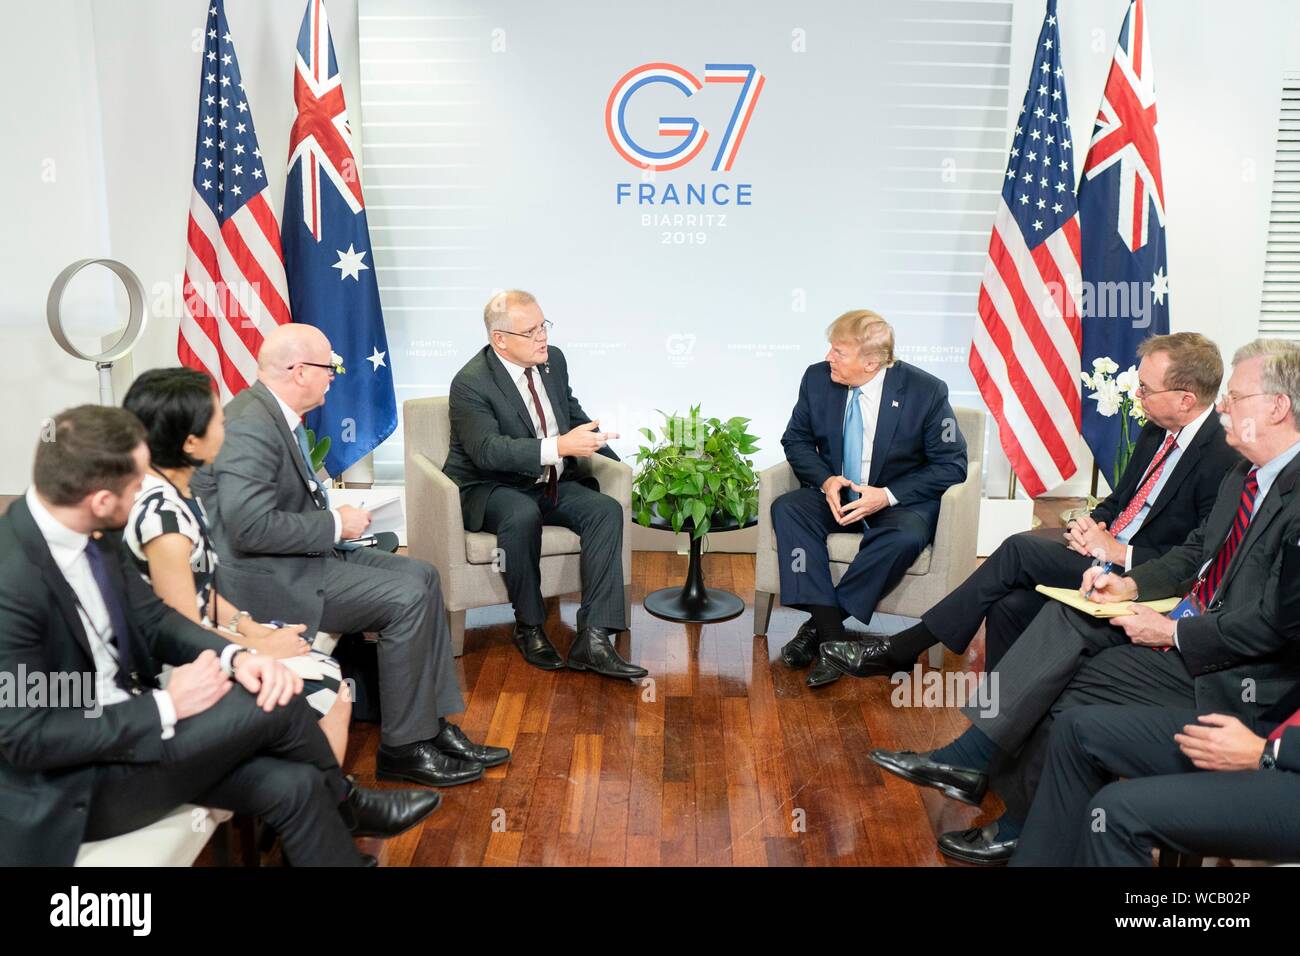 U.S. President Donald Trump during a bilateral meeting with Australian Prime Minister Scott Morrison, left, on the sidelines of the G7 Summit at the Centre de Congrés Bellevue August 25, 2019 in Biarritz, France. Stock Photo